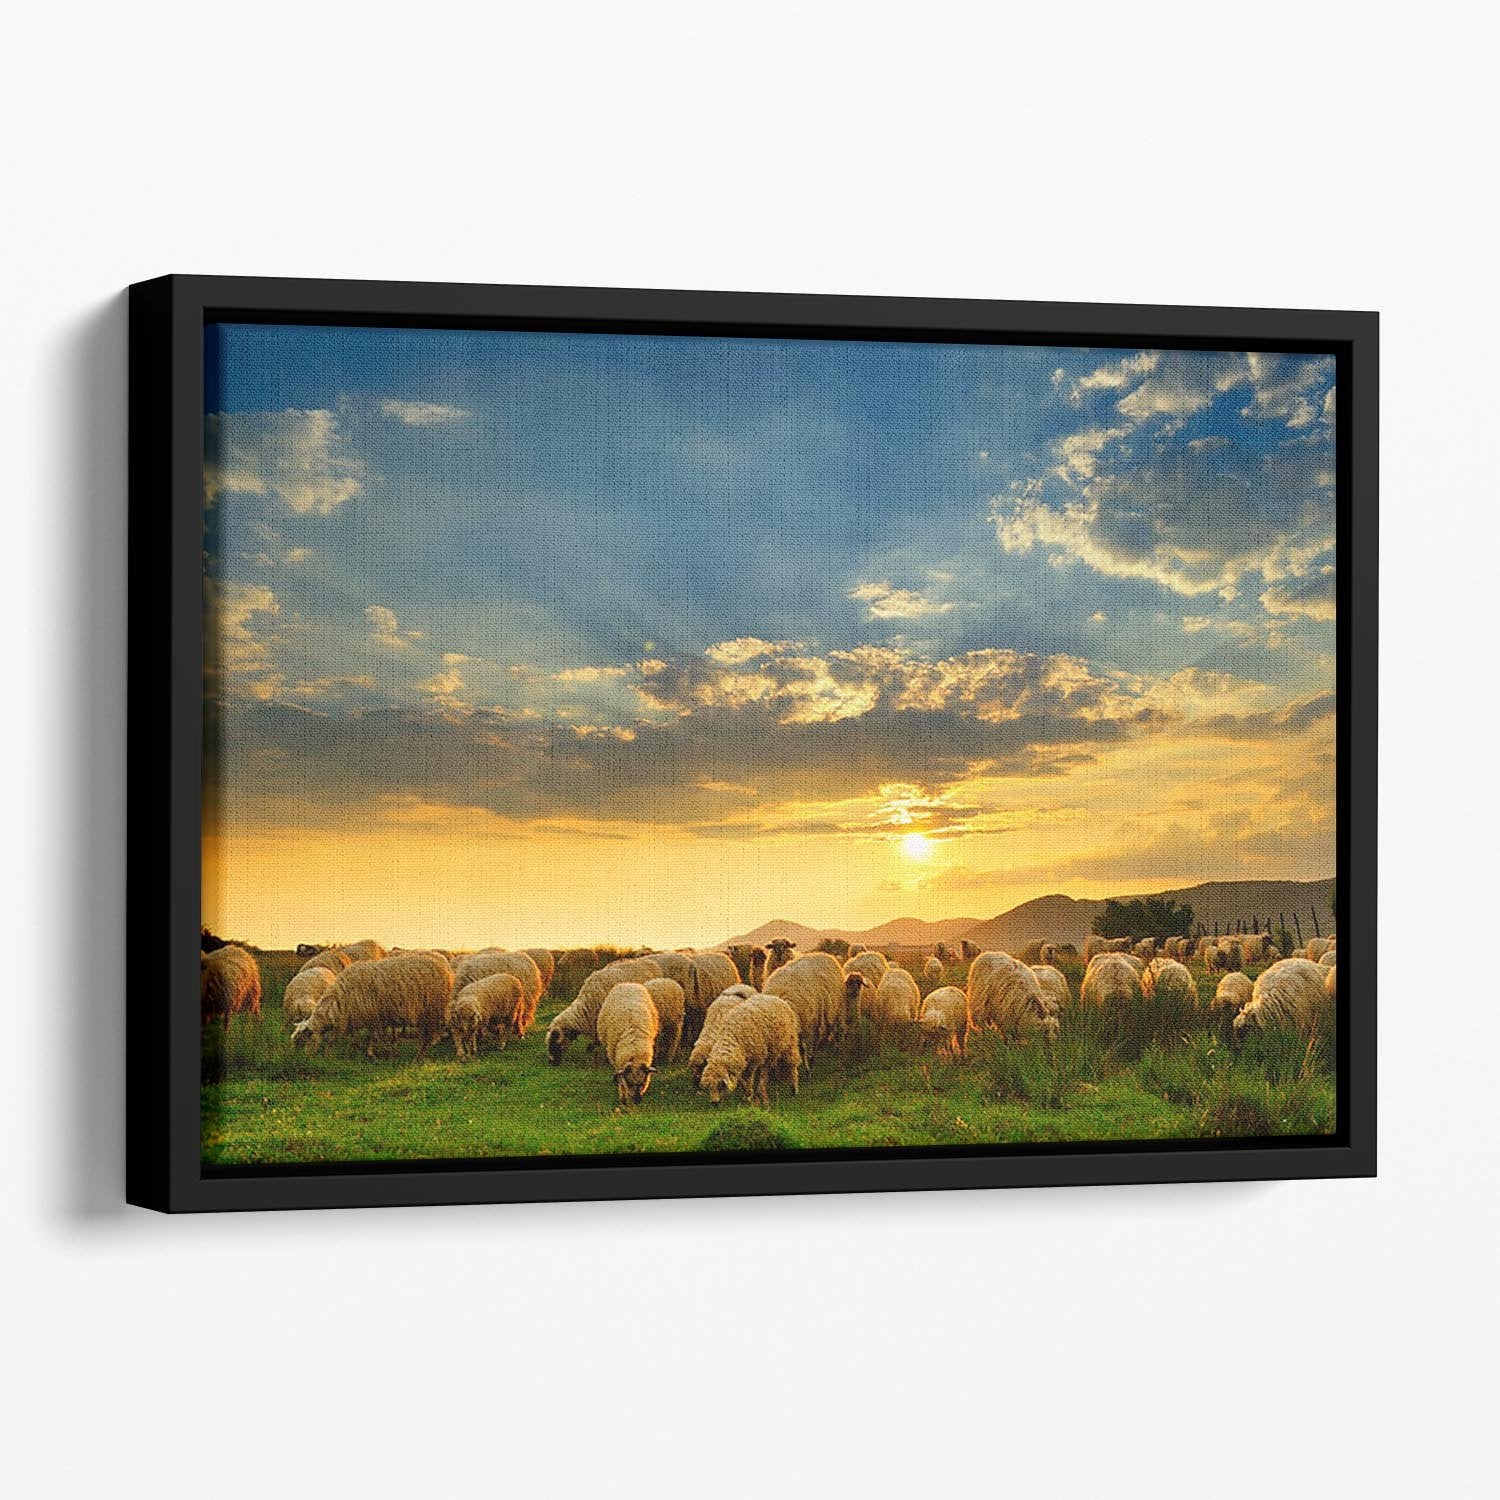 Flock of sheep grazing in a hill at sunset Floating Framed Canvas - Canvas Art Rocks - 1